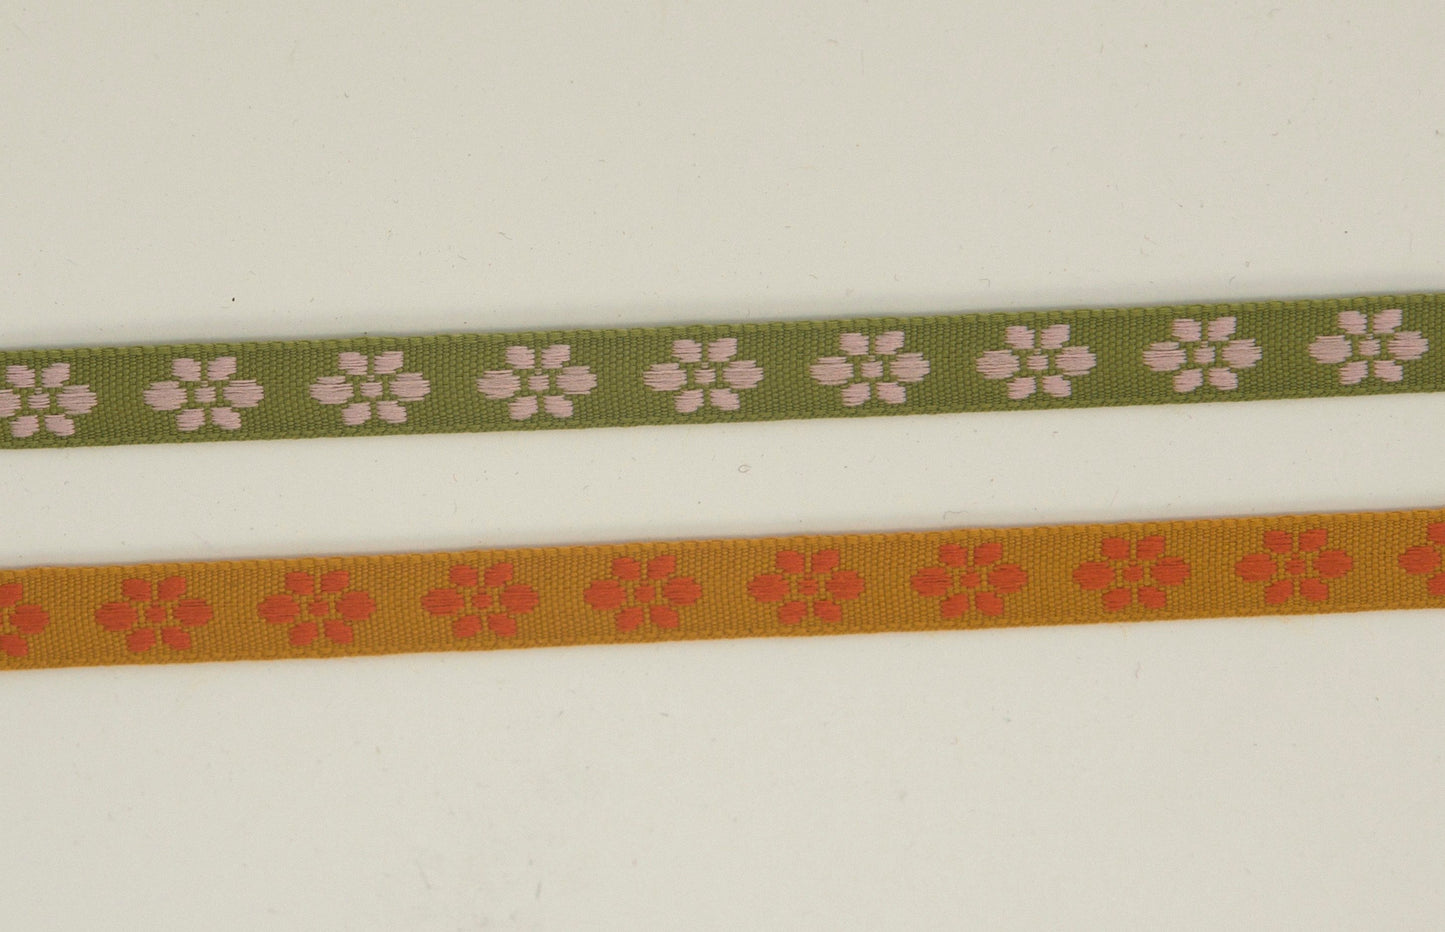 Ribbon with flowers 9 mm